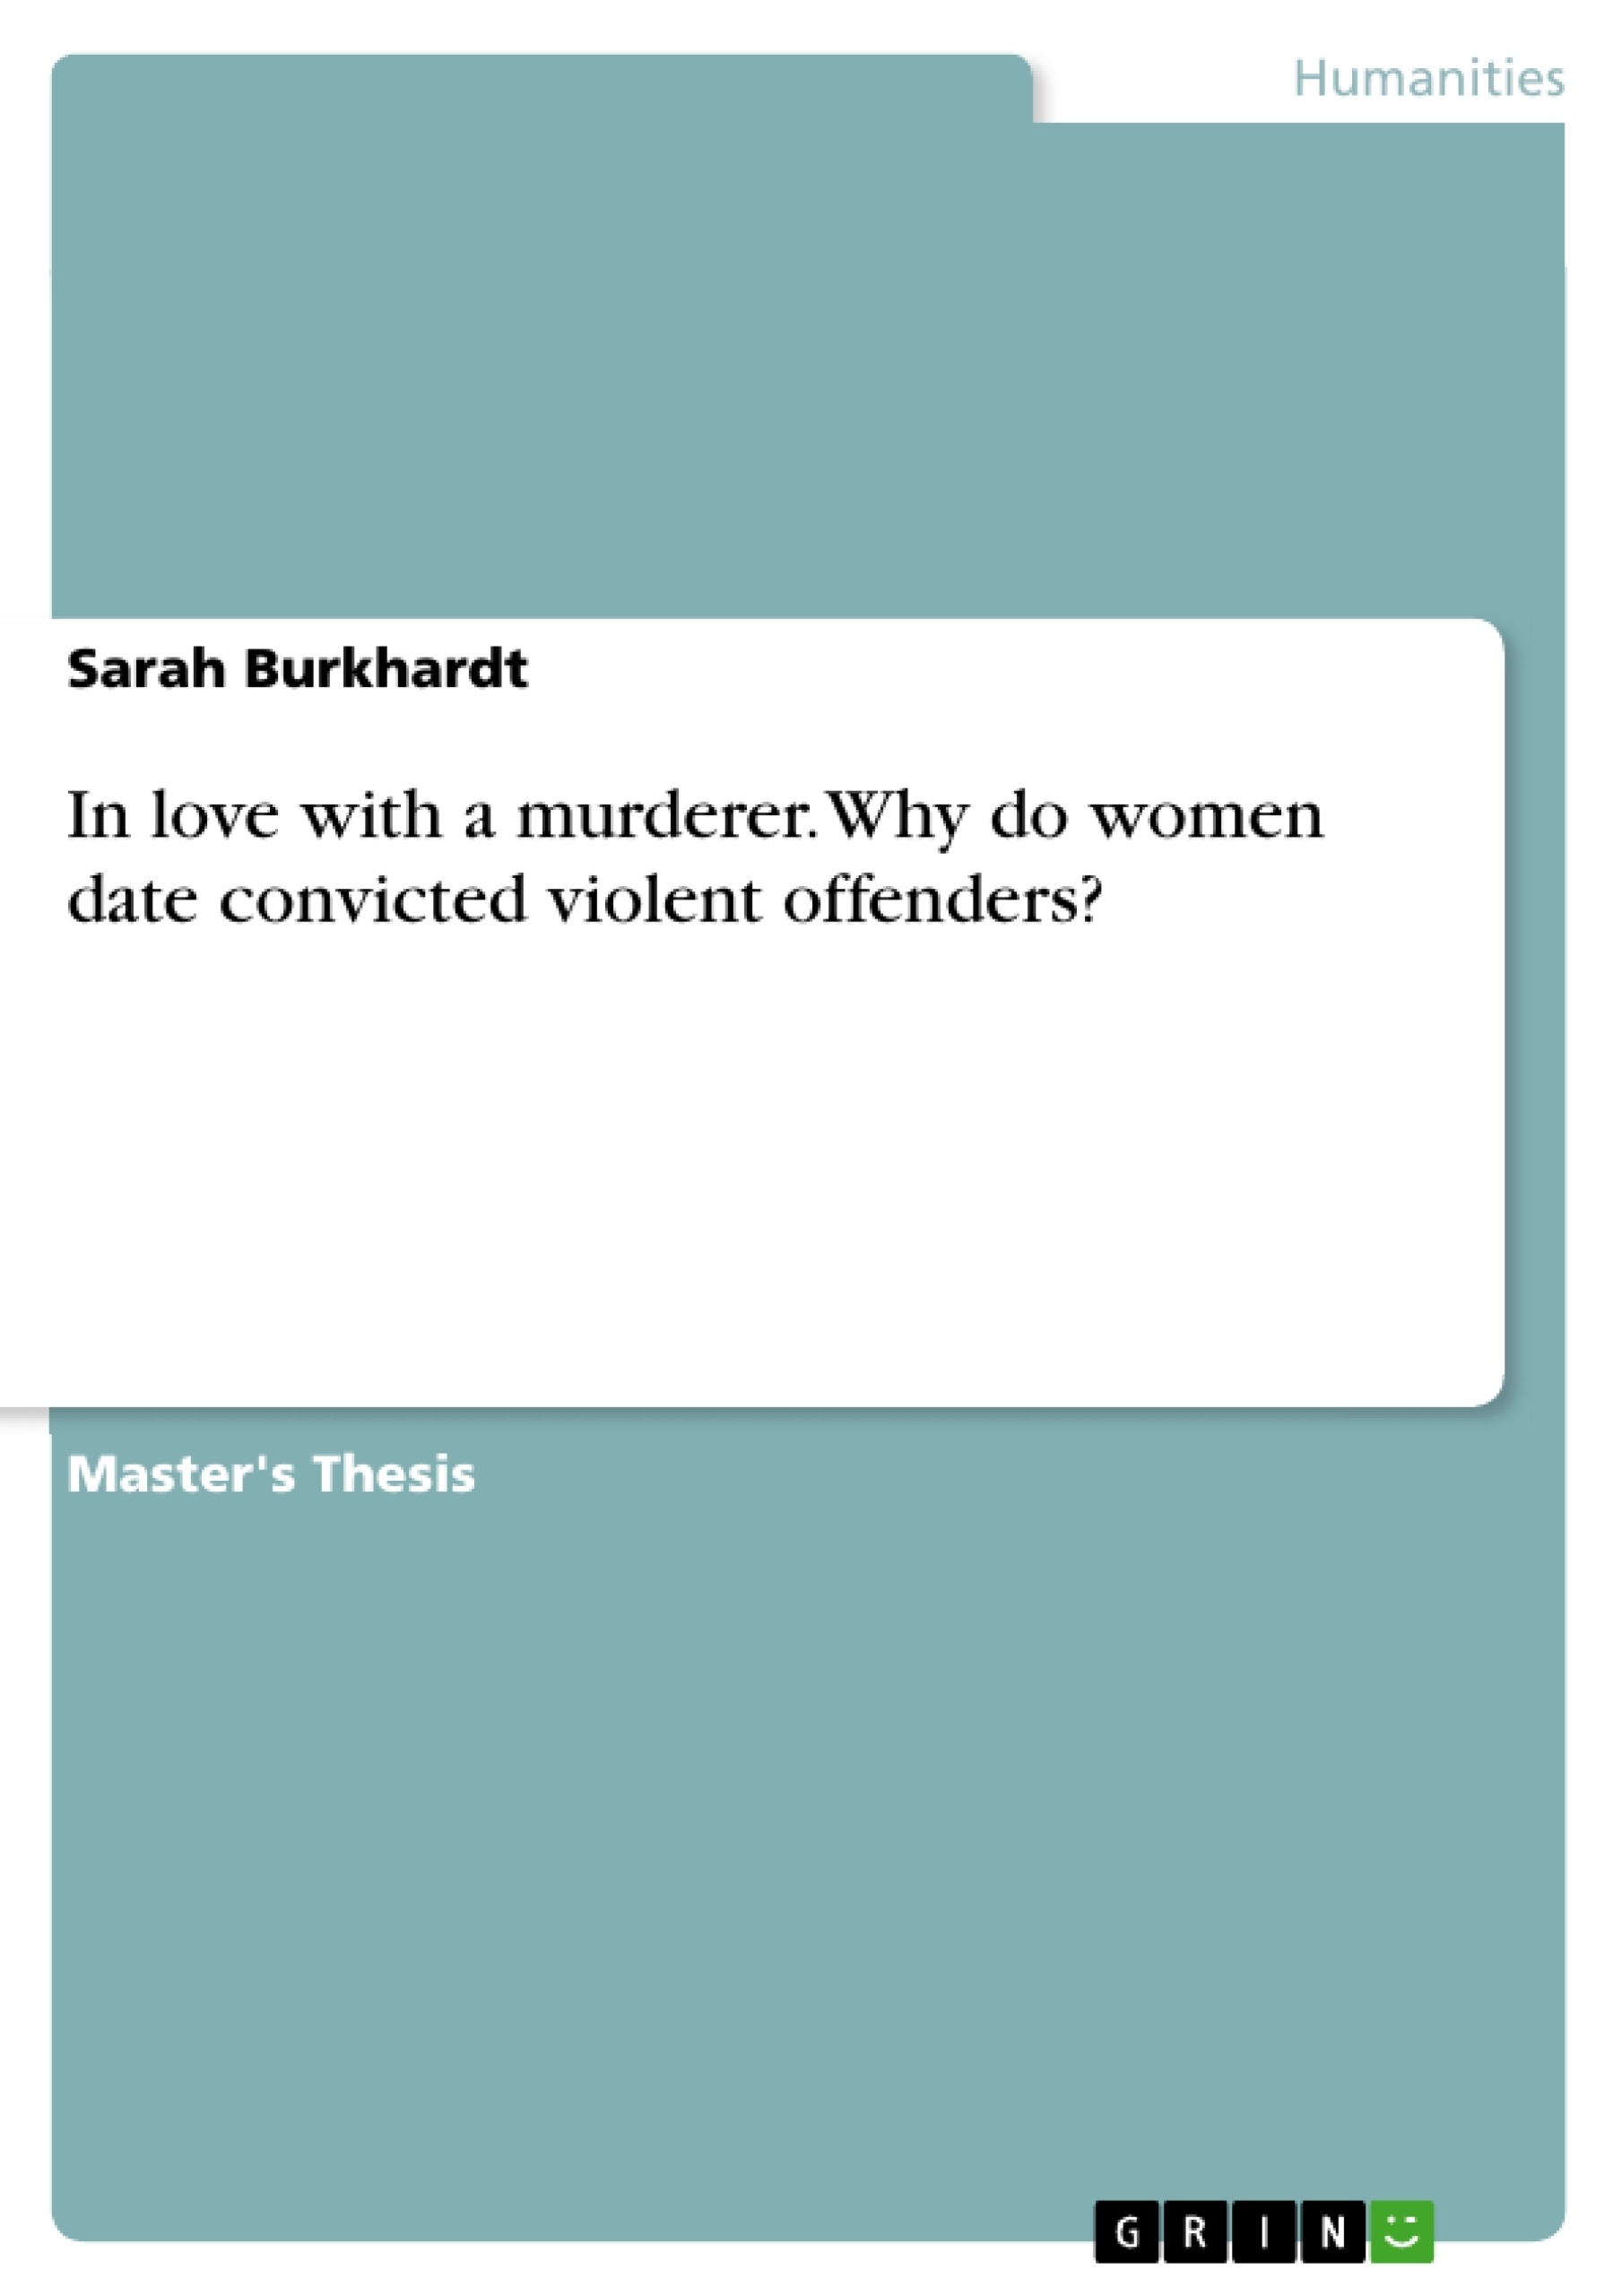 Título: In love with a murderer. Why do women date convicted violent offenders?